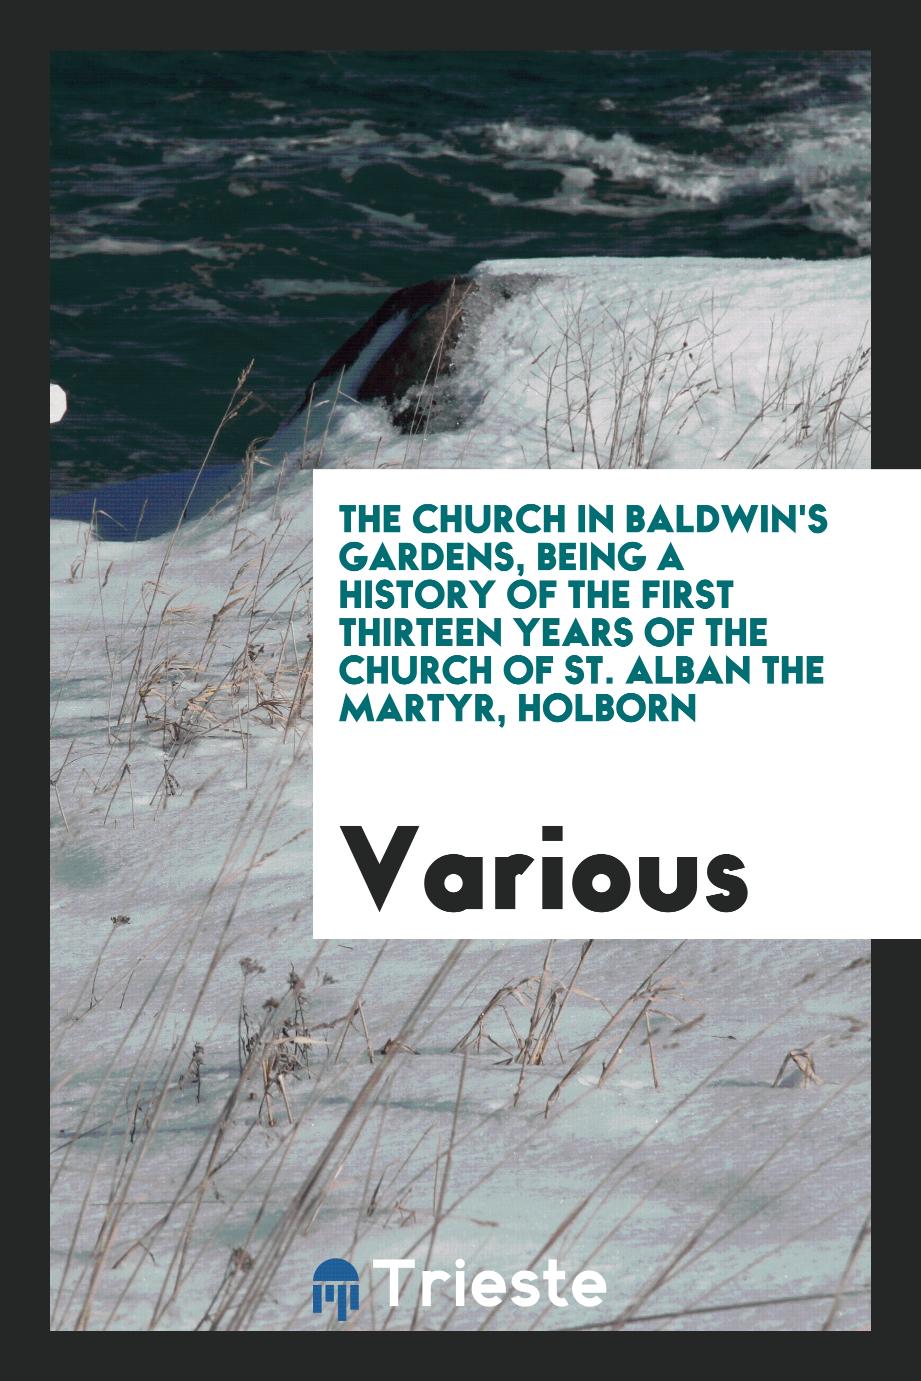 The church in Baldwin's Gardens, being a history of the first thirteen years of the Church of St. Alban the Martyr, Holborn